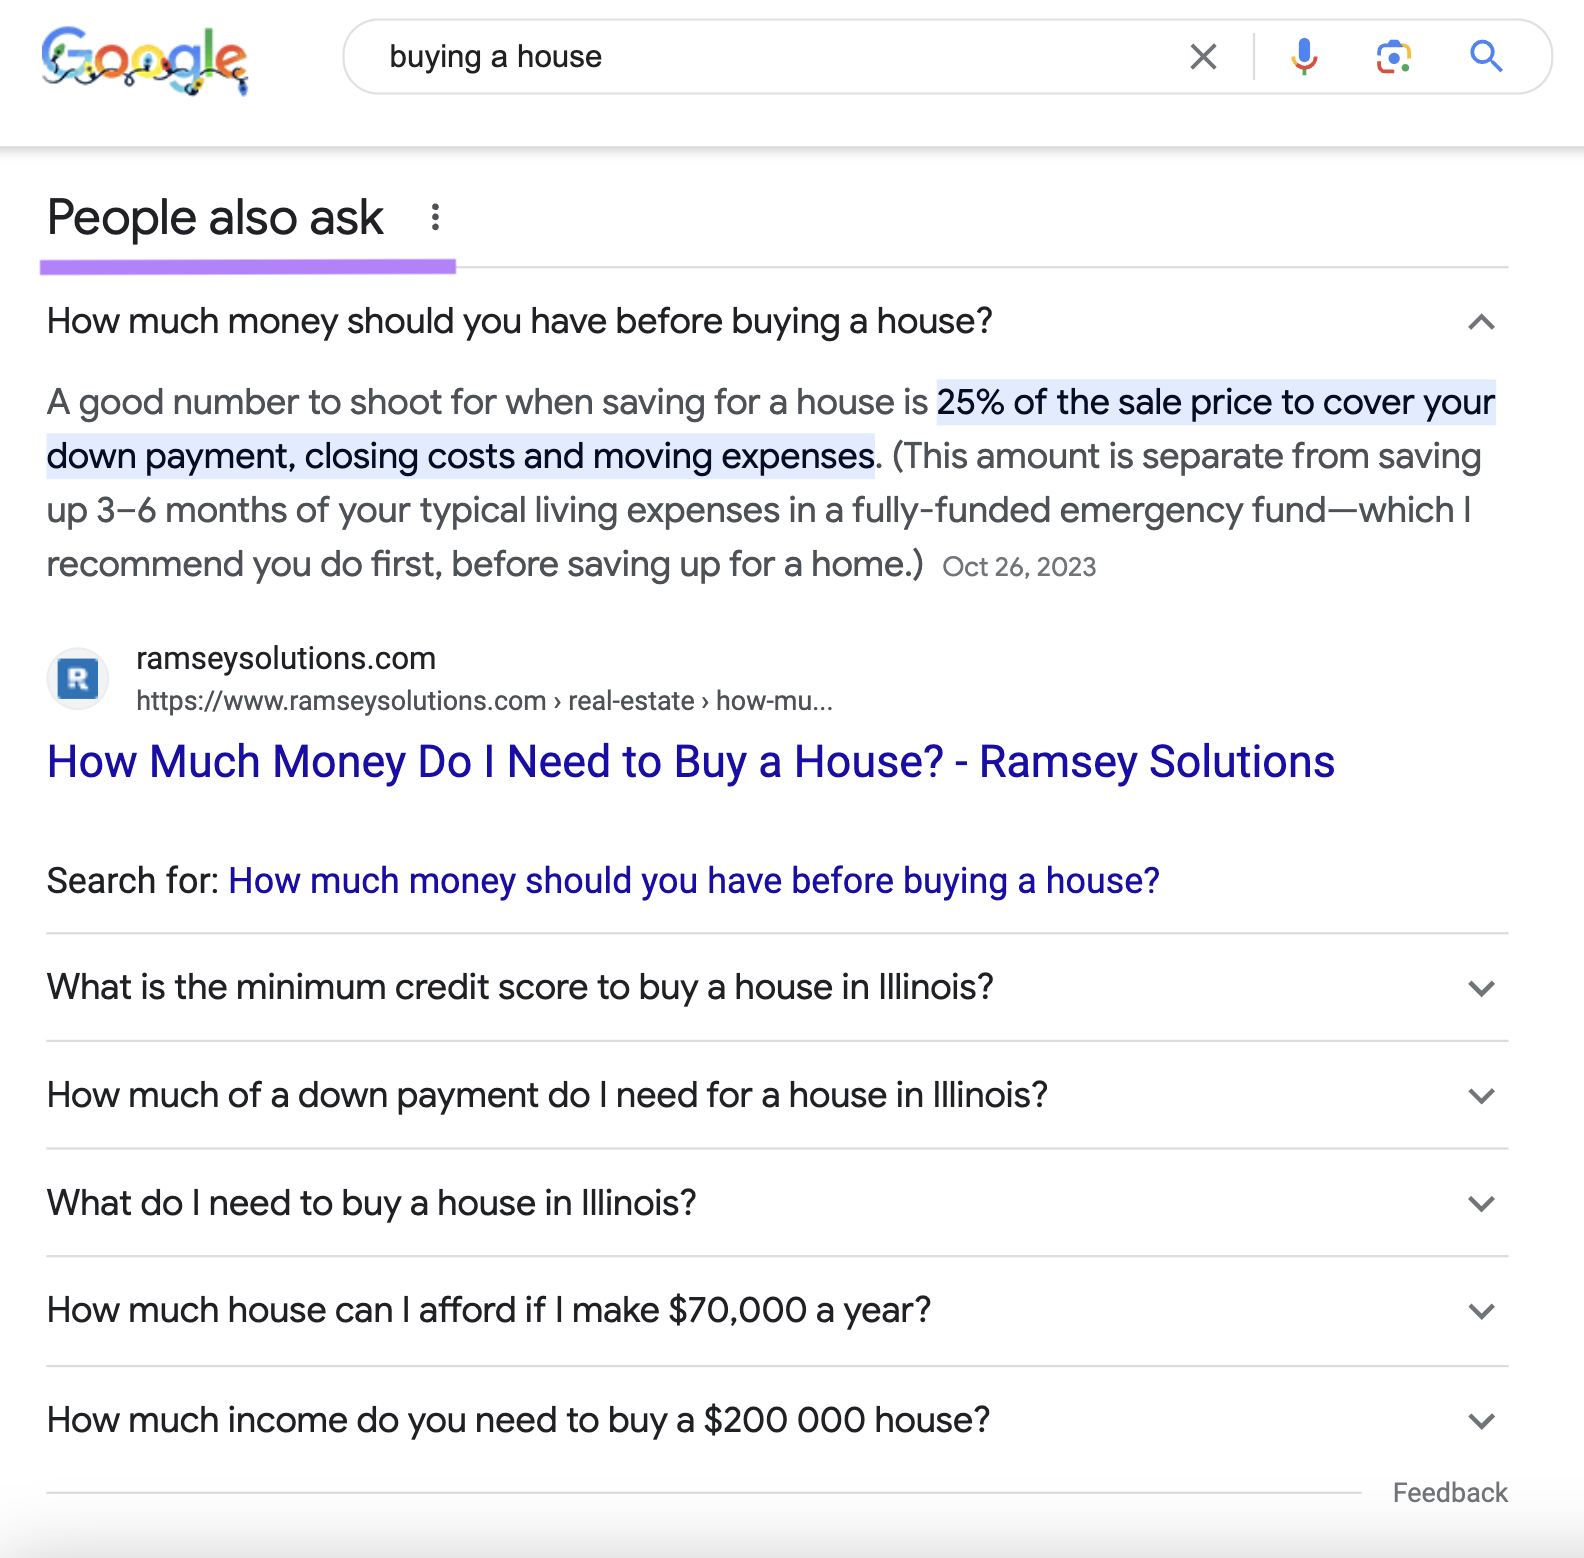 People Also Ask section on Google SERP for "buying a house" query